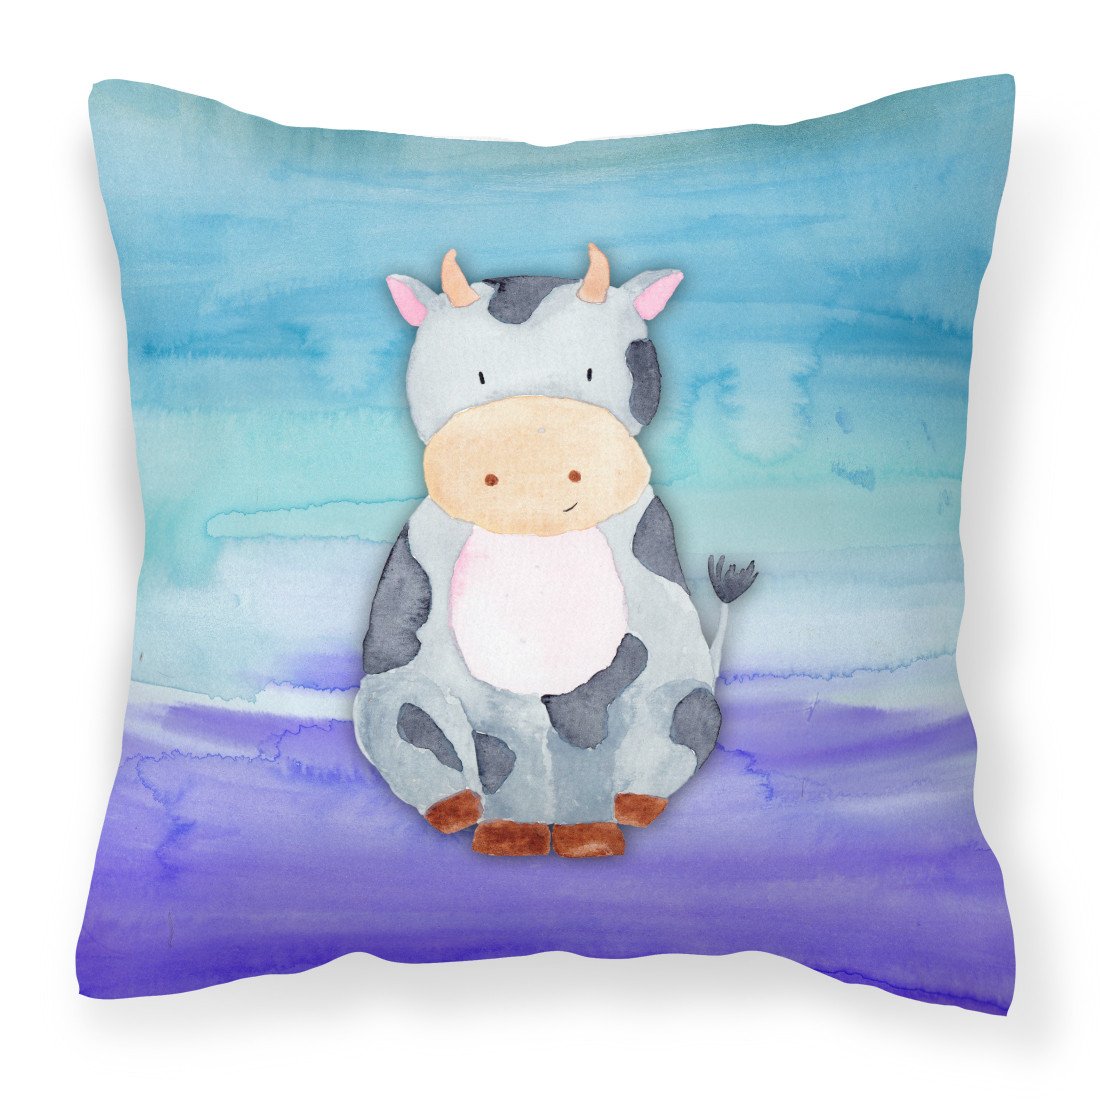 Cow Watercolor Fabric Decorative Pillow BB7412PW1818 by Caroline's Treasures